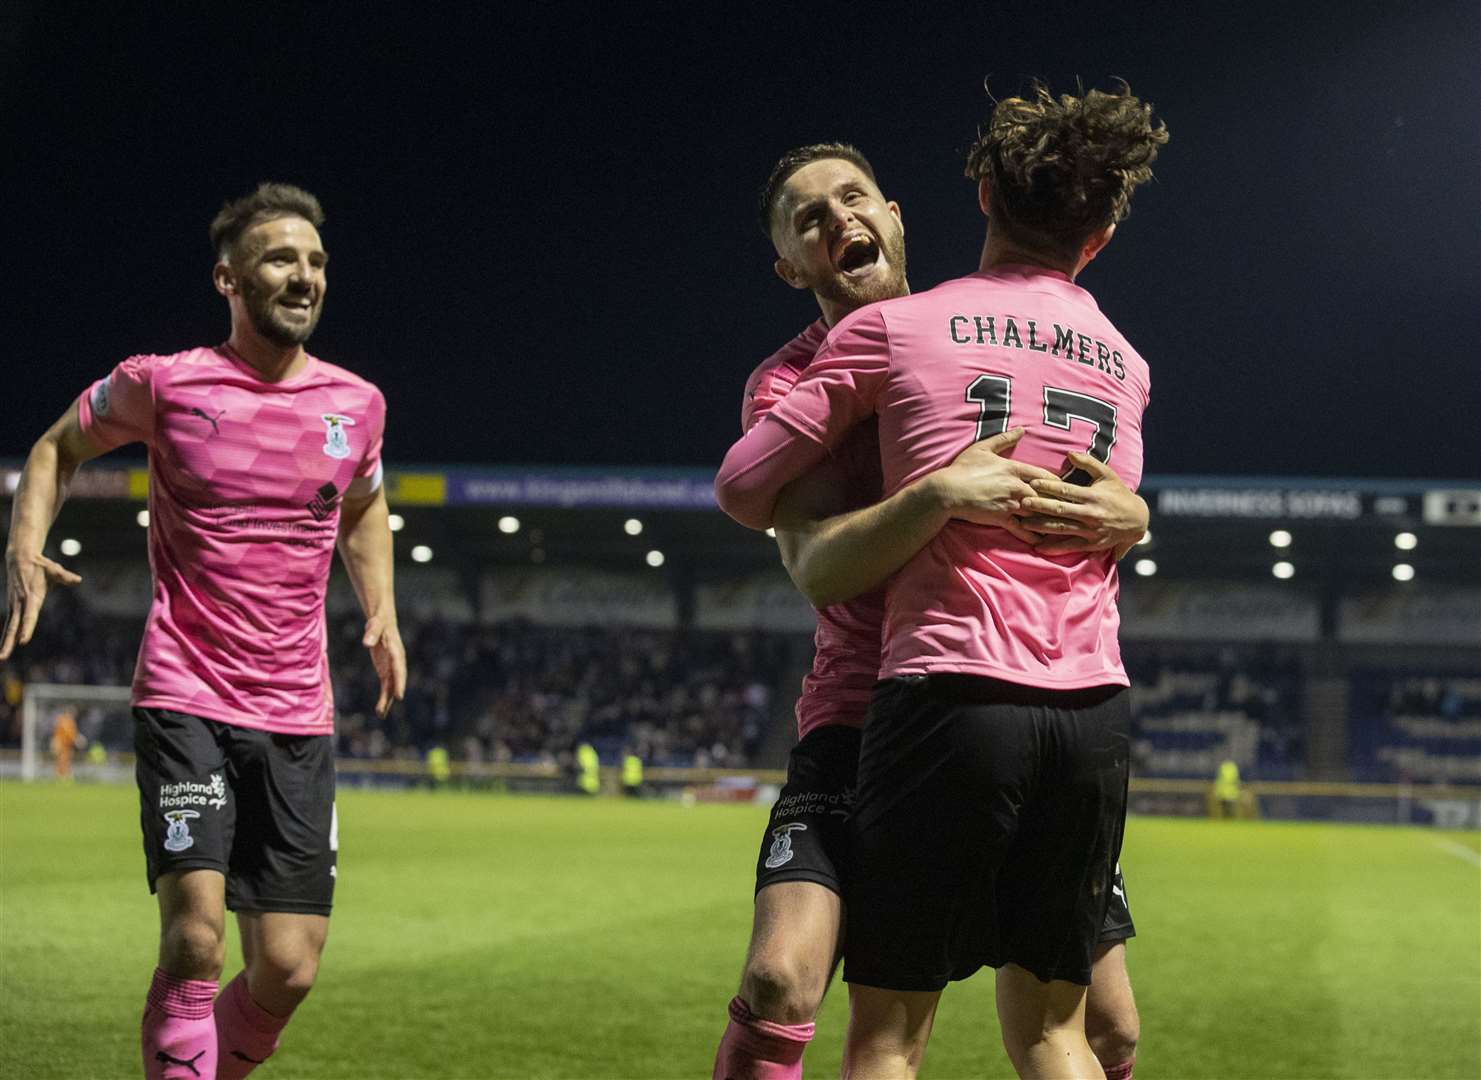 Inverness Caledonian Thistle beat Kilmarnock 2–1 on Friday night with Danny Devine pictured celebrating the winning goal scored by Logan Chalmers. Picture: Ken Macpherson